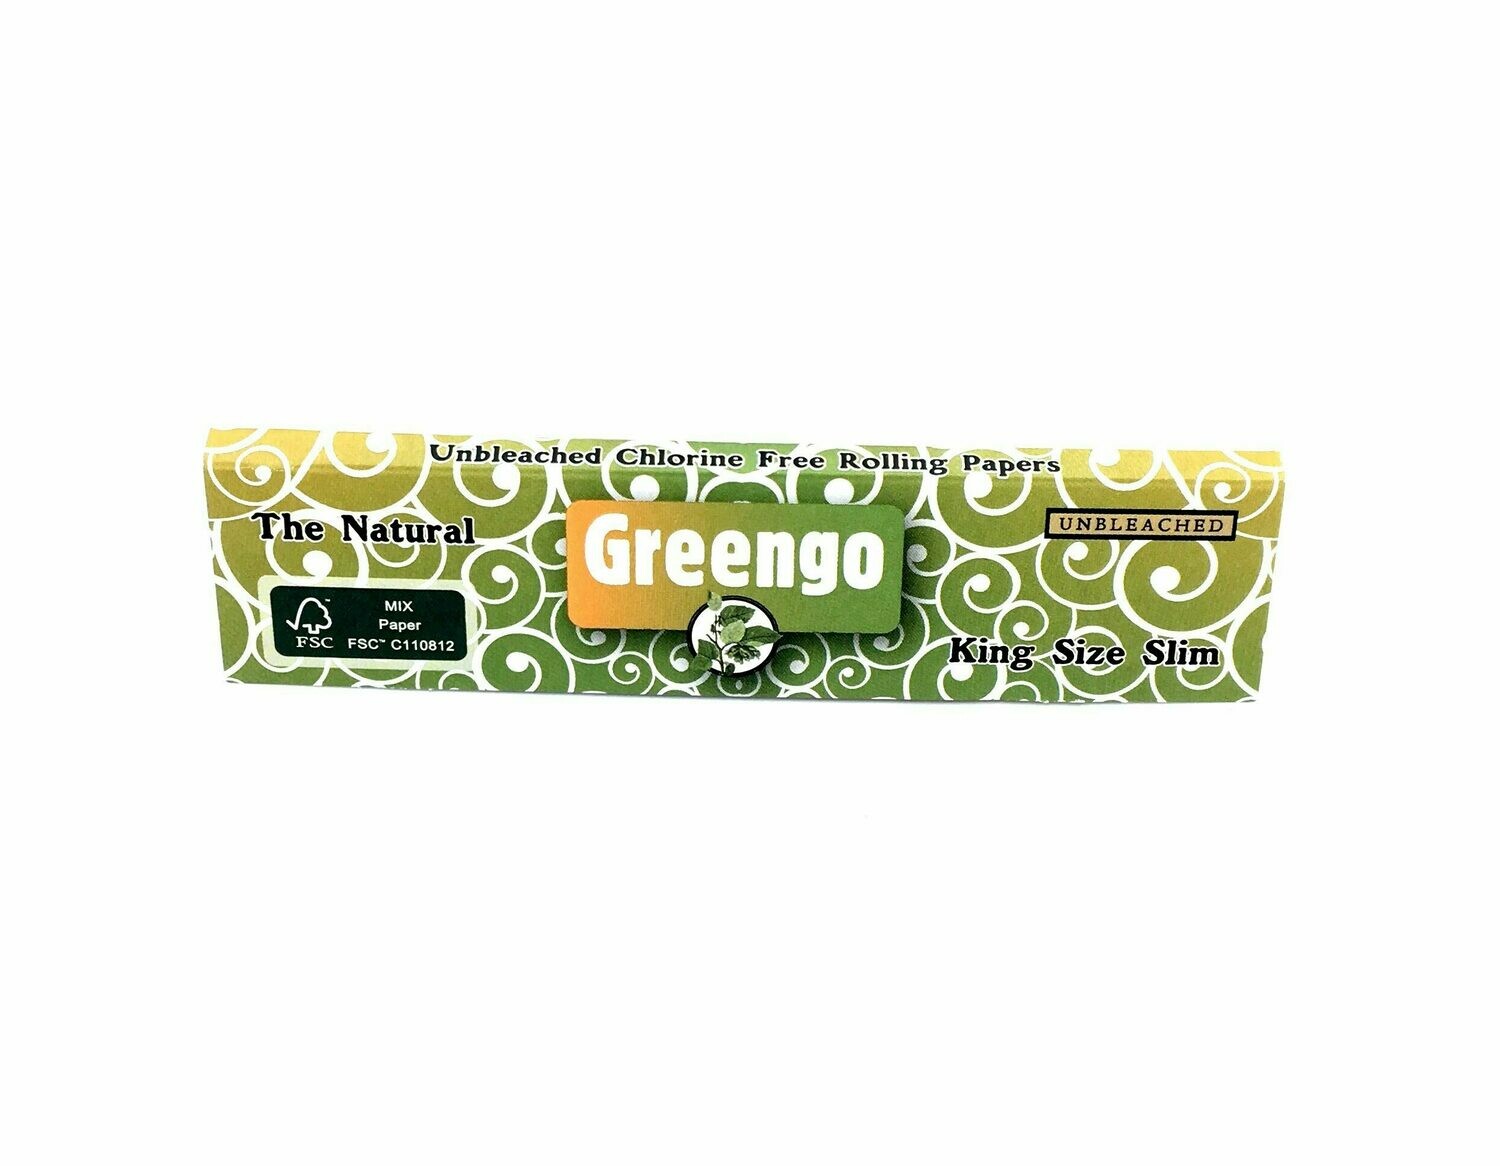 'Greengo' Papers KS unbleached